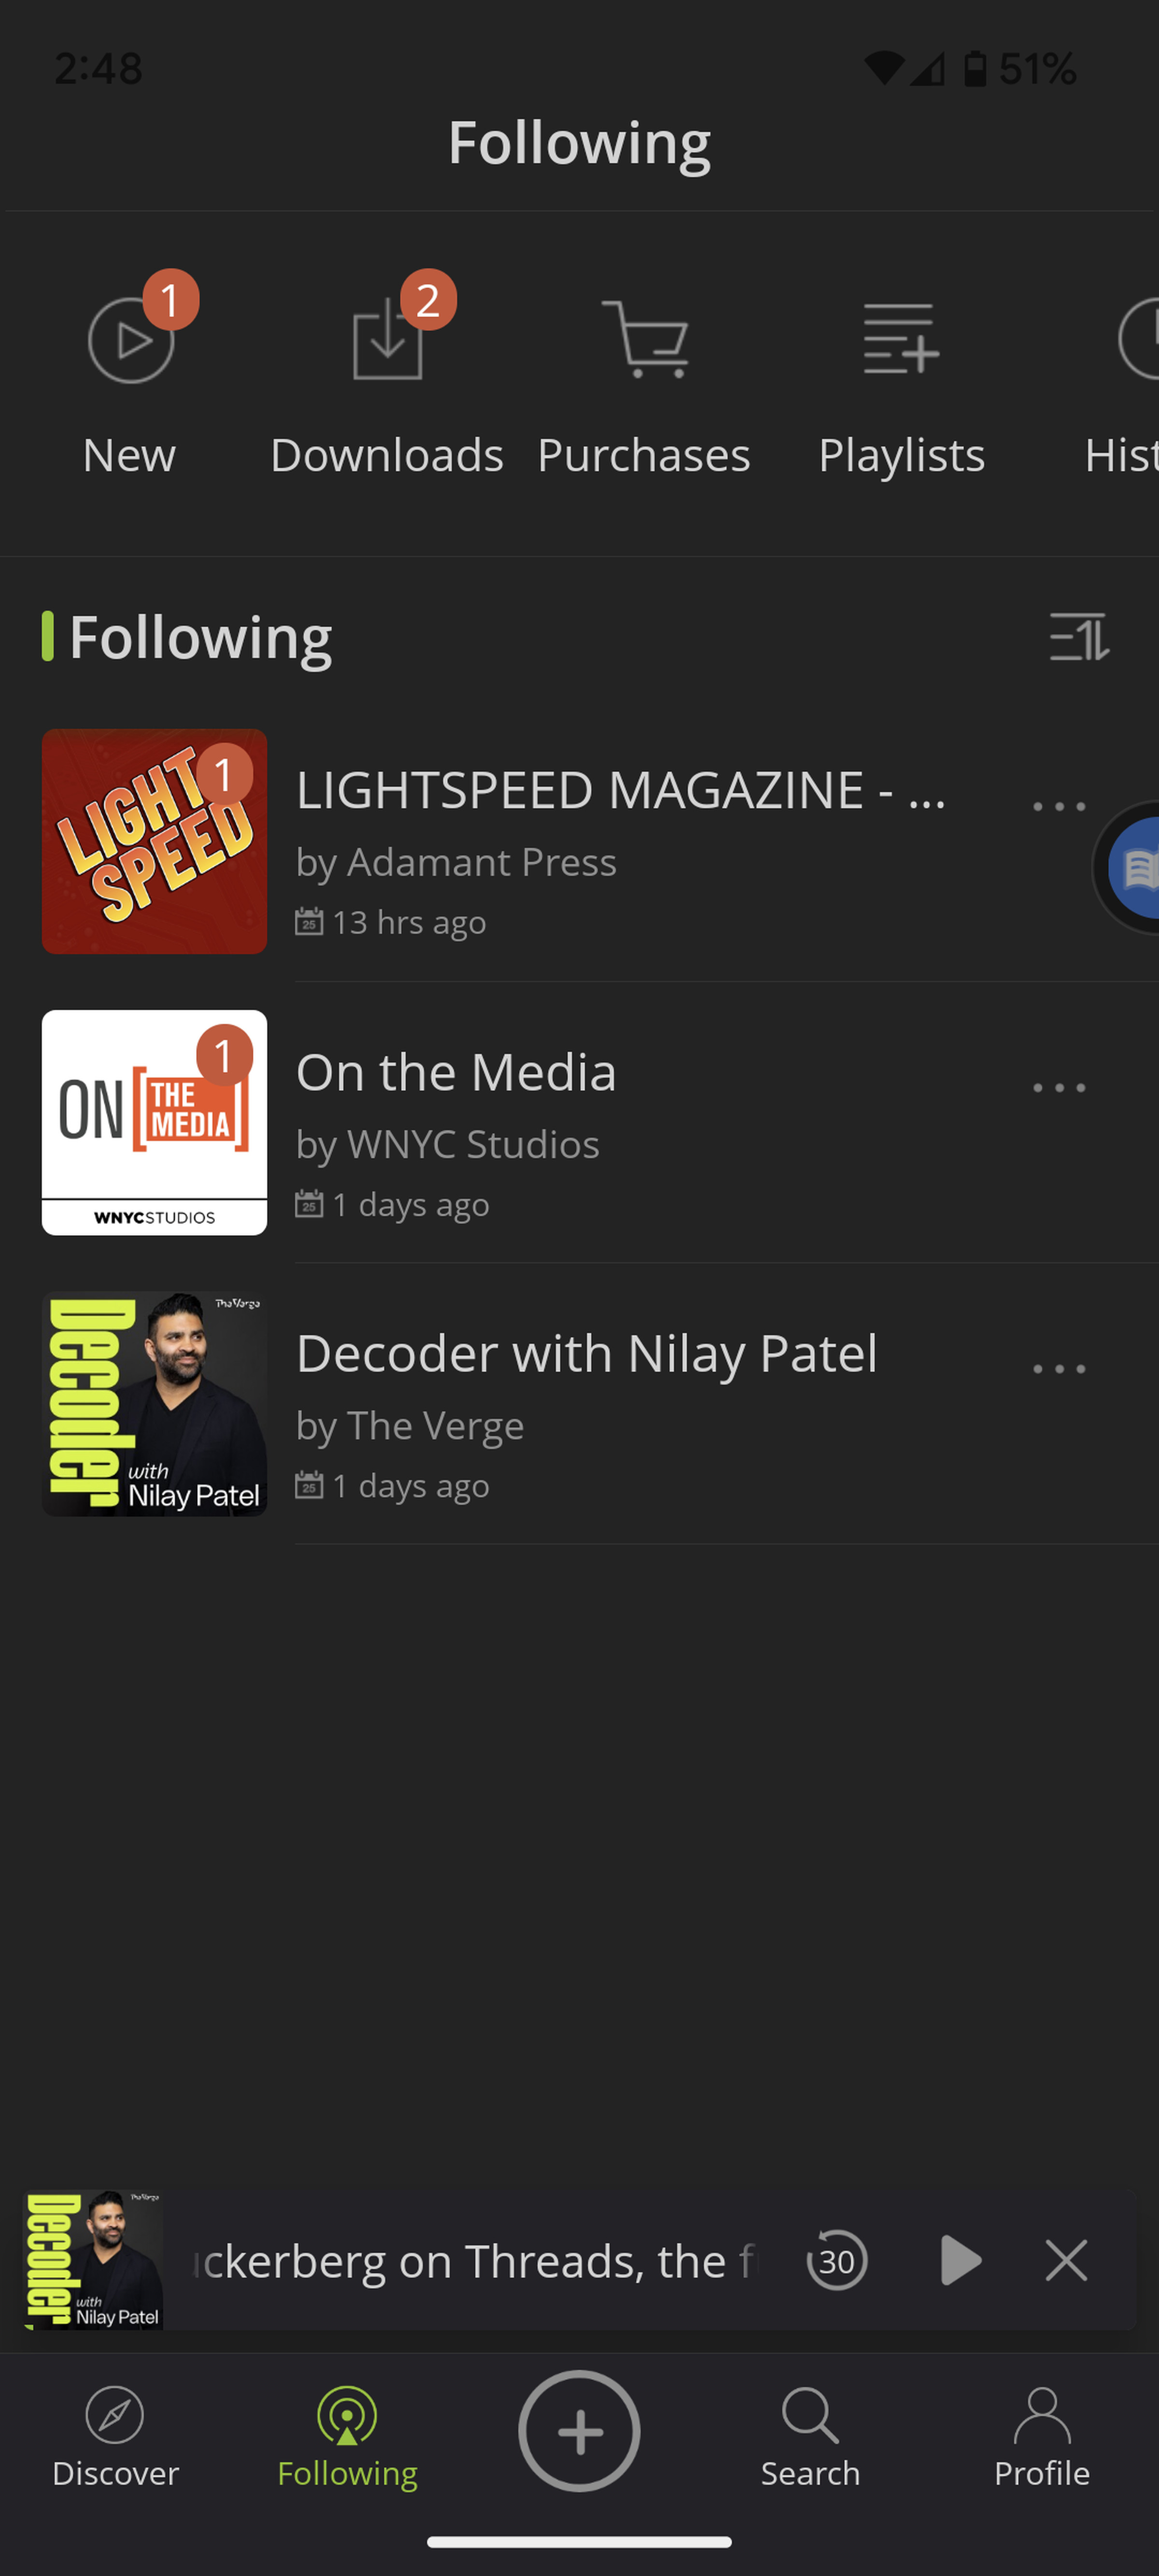 Page headed “Following” with a row of icons and three podcast covers.